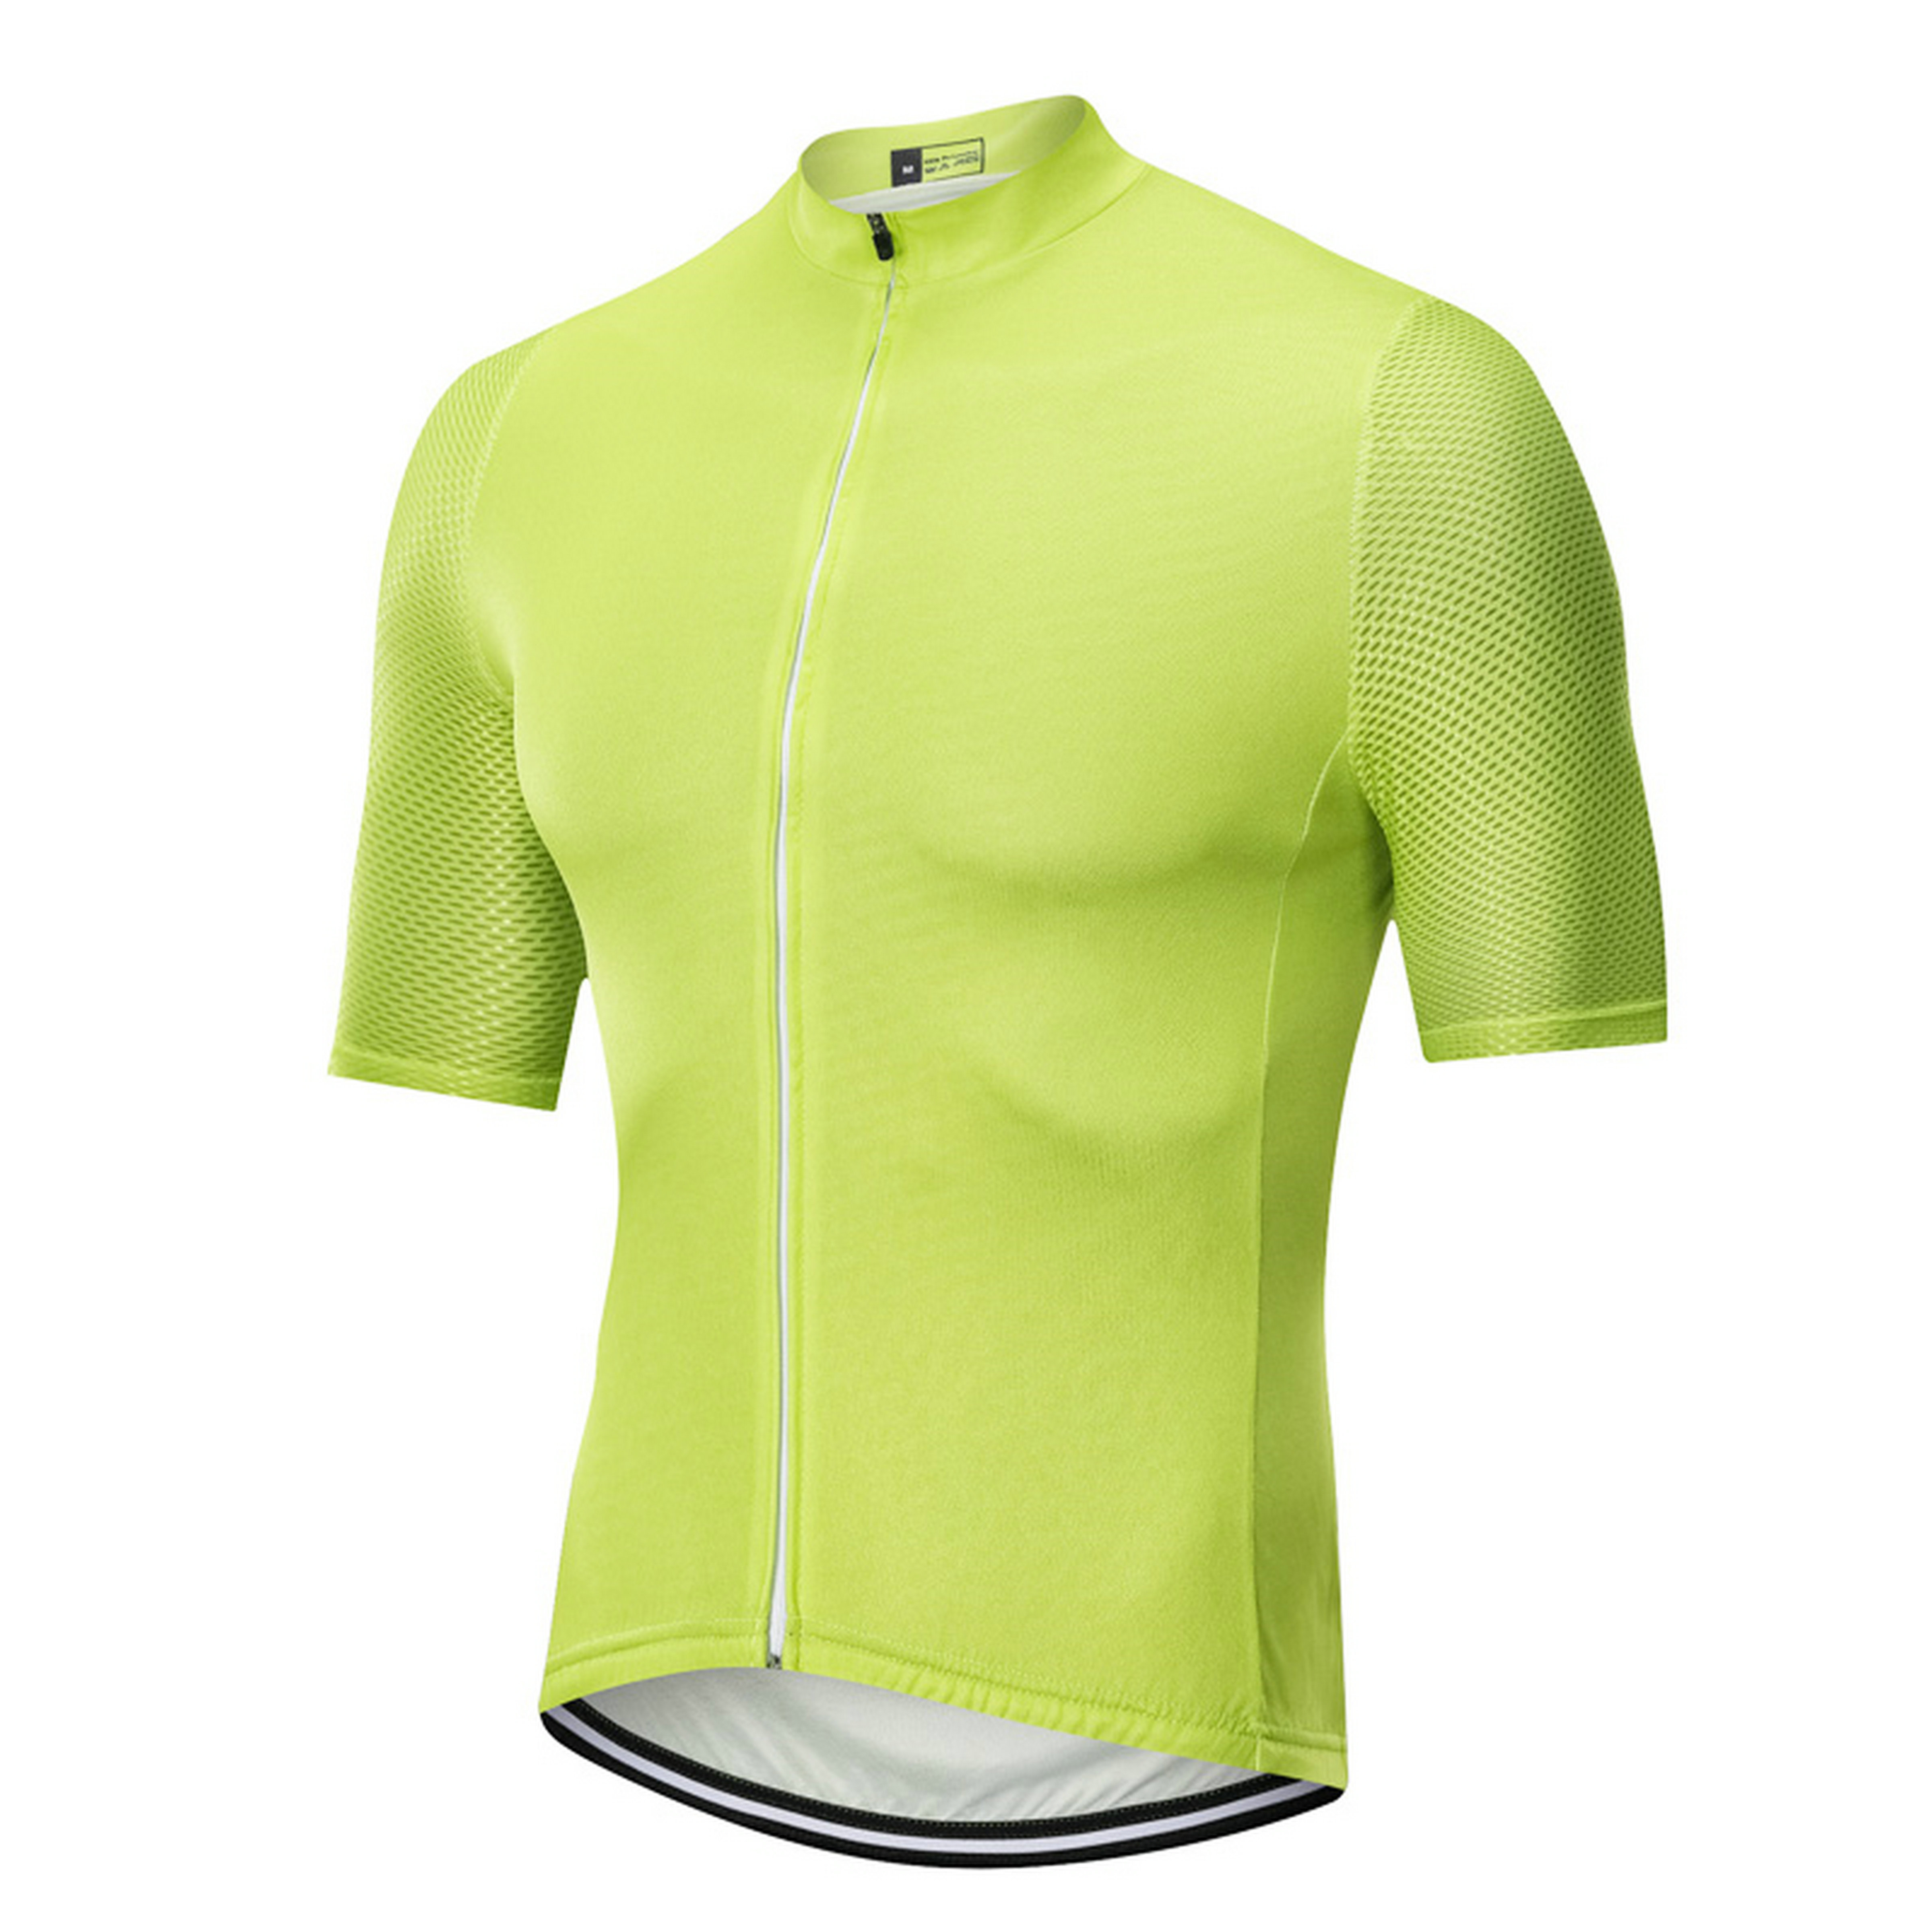 2020 Latest Design Heavyweight Softshell Jacket - Quick-dry cycling bicycle clothing custom summer shorts sleeve cycling wear pro team cycling jersey bike shirts for men – Ruisheng